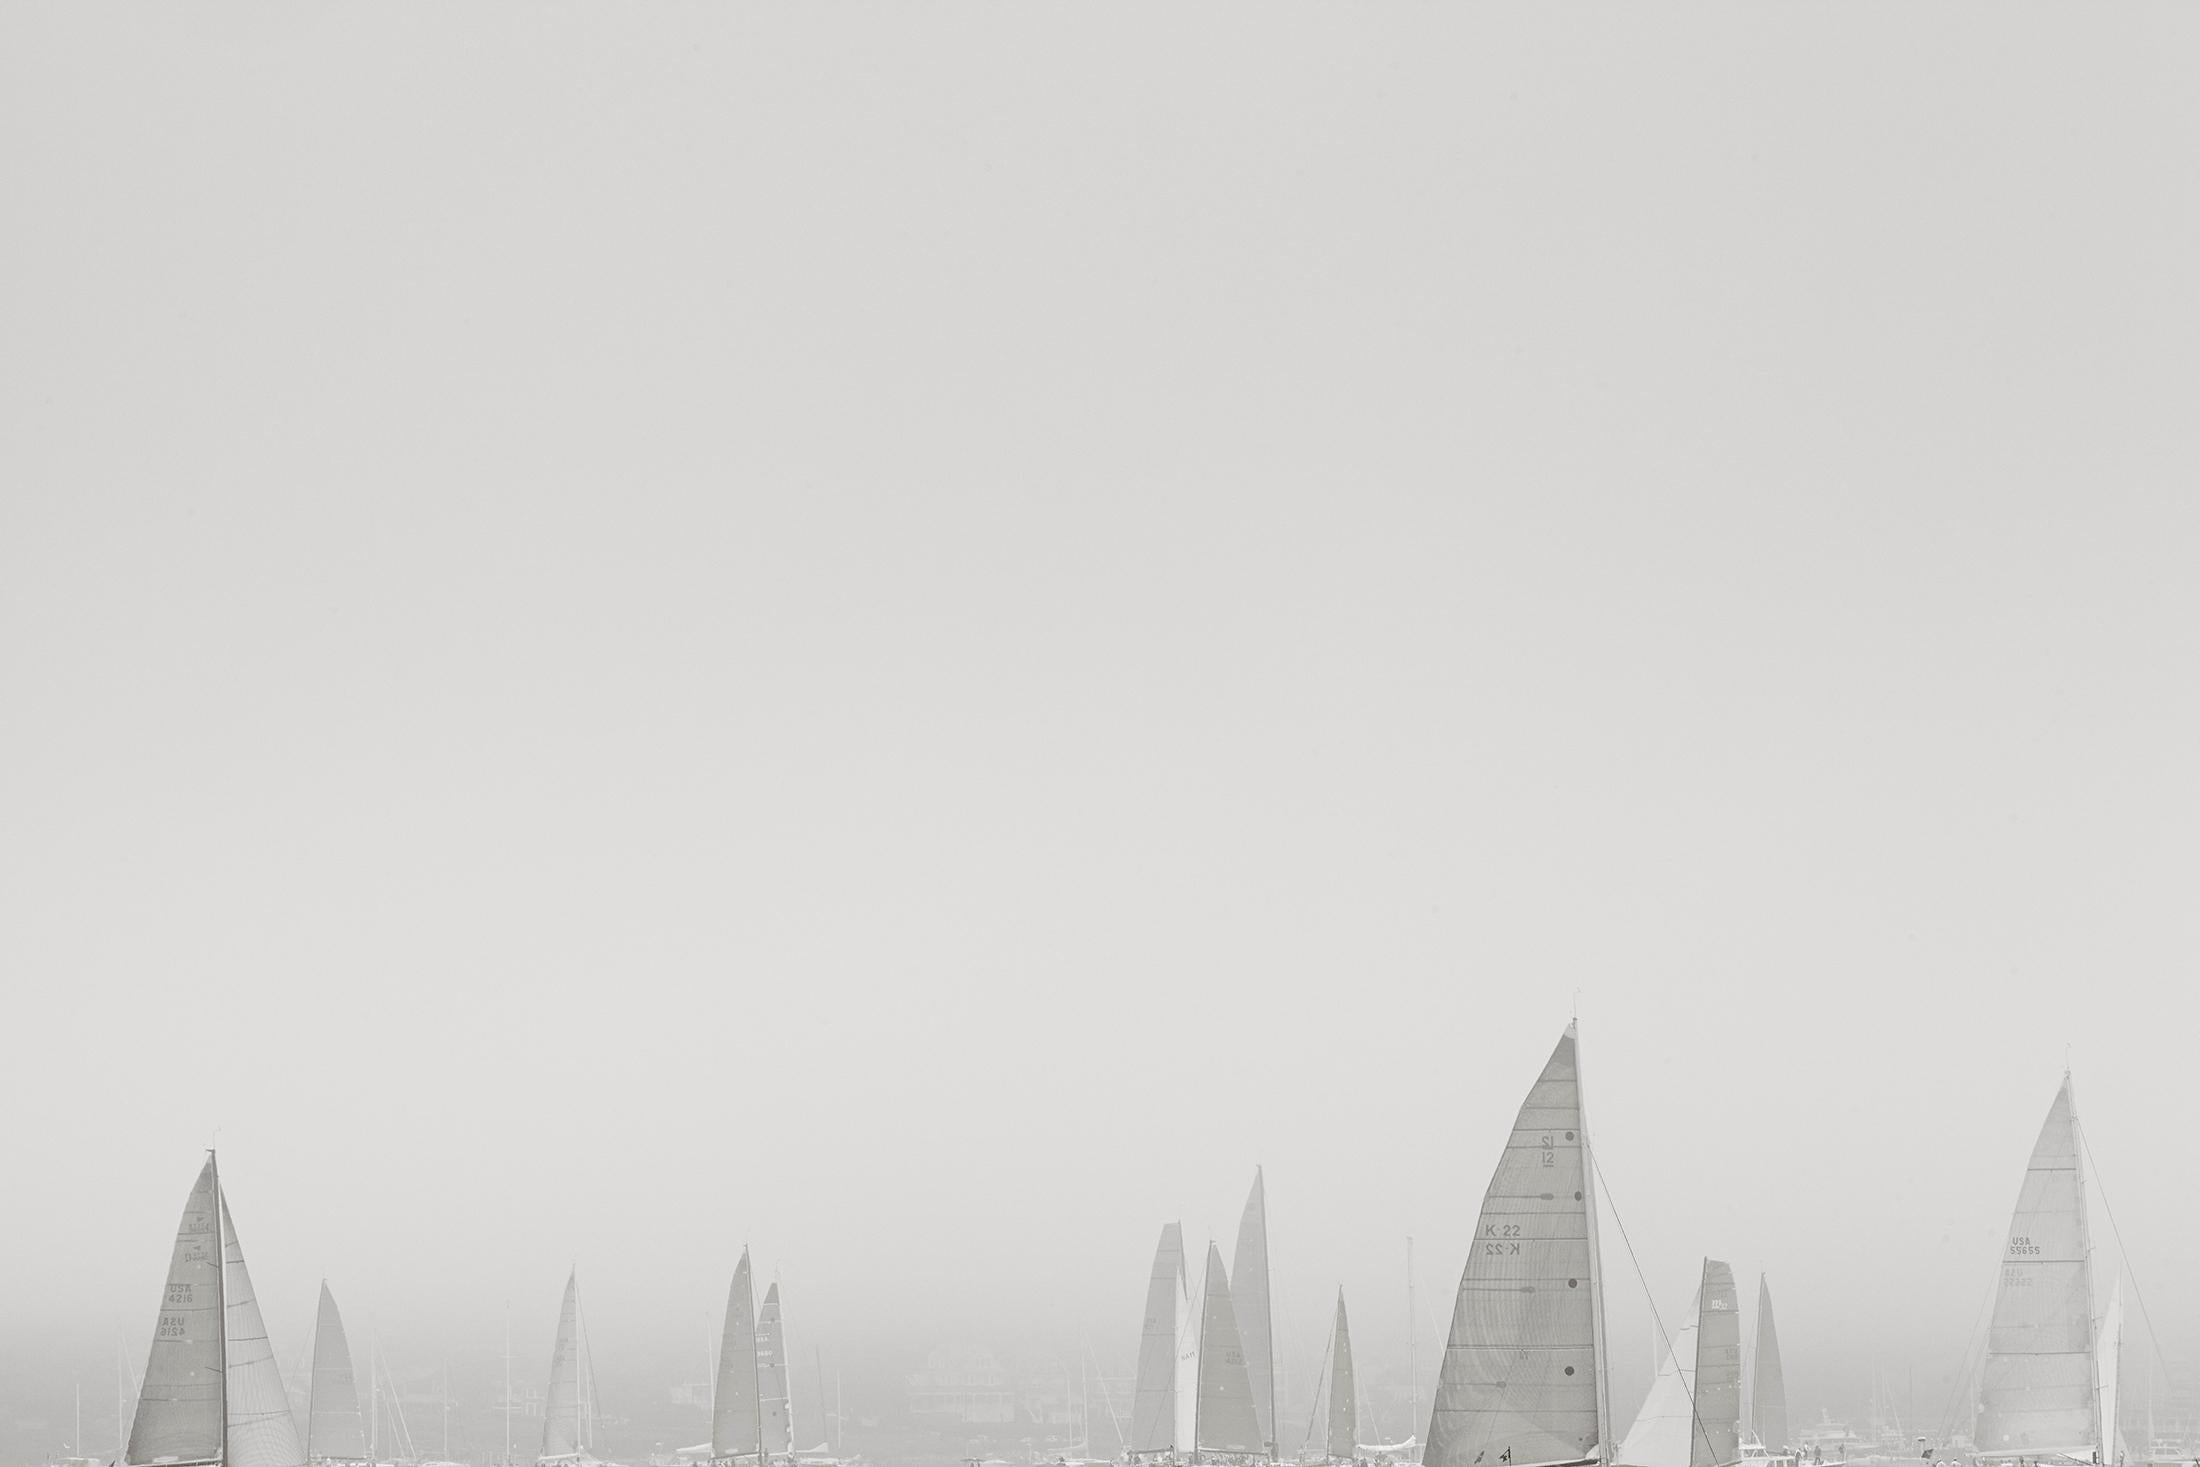 Drew Doggett Black and White Photograph - World-Class Yachts in Fog at the Regatta, Iconic Black and White Print